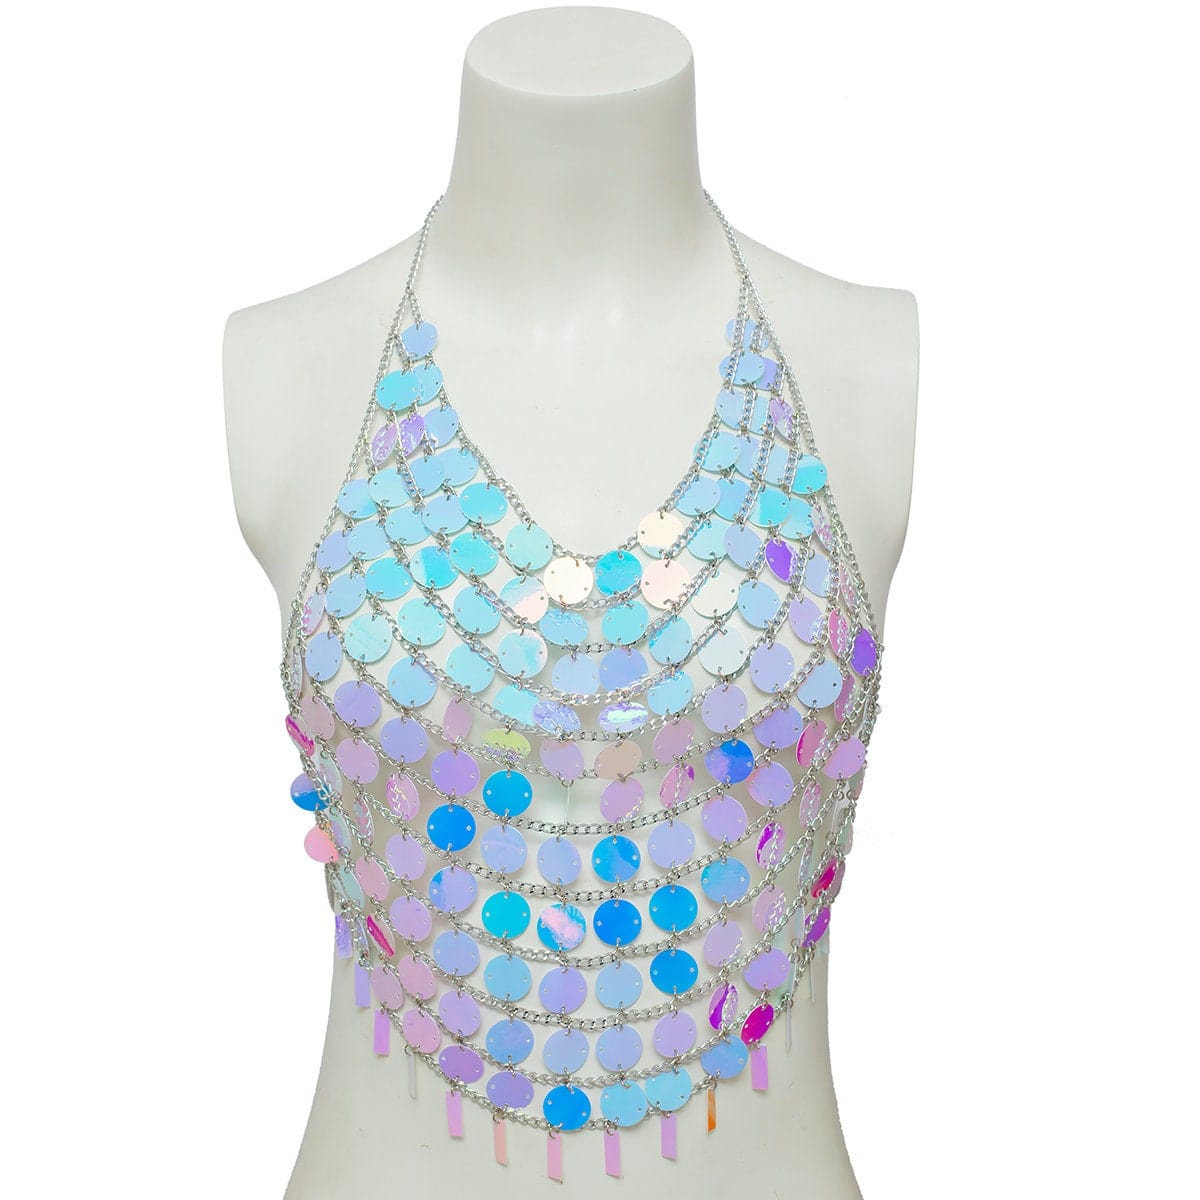 Handmade Backless Colorful Sequins Body Chain Bra